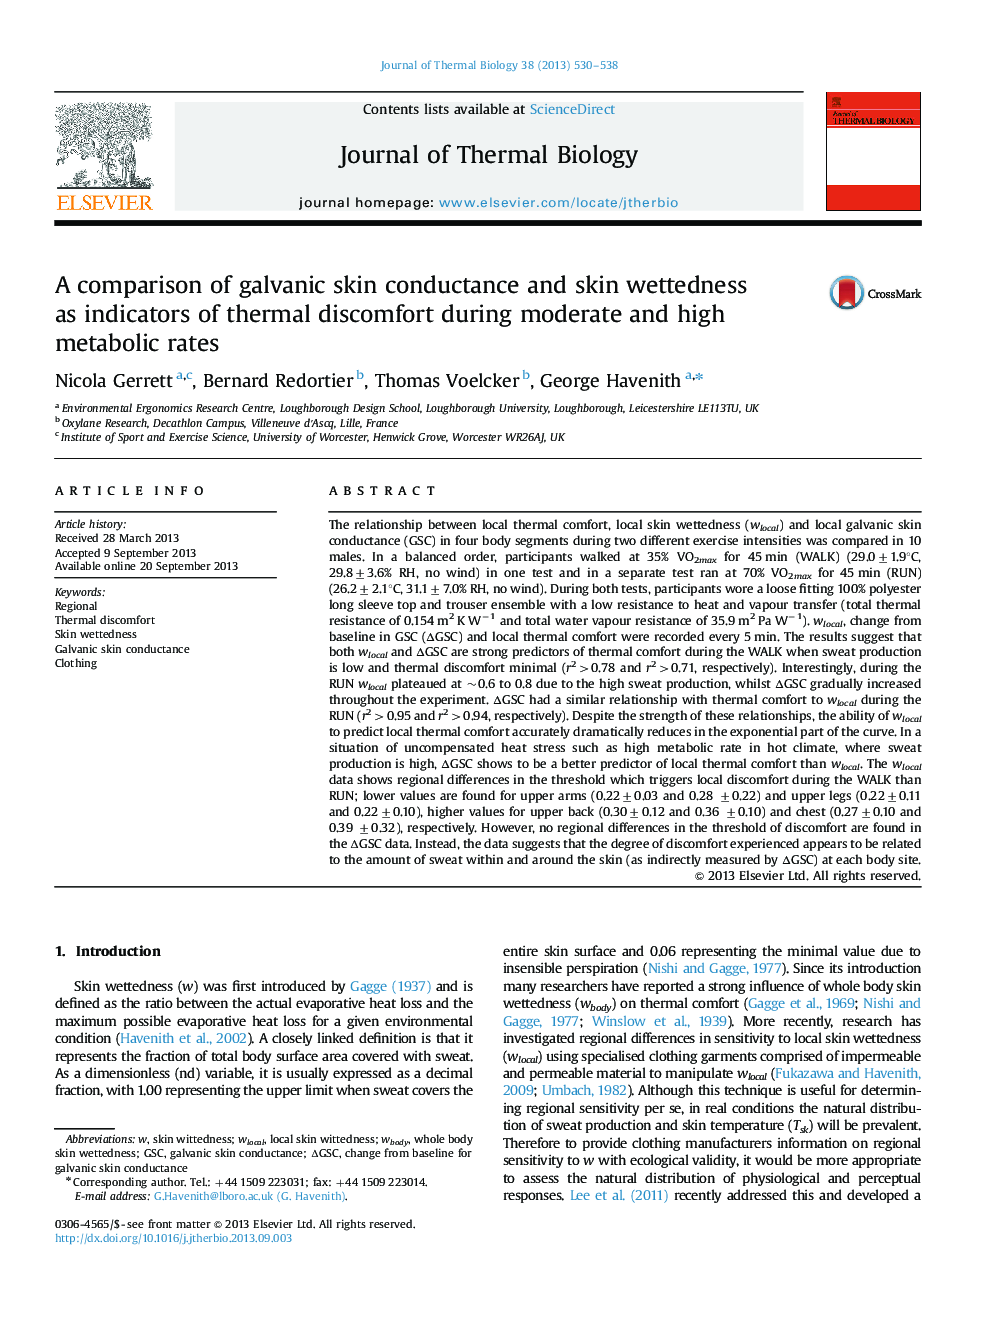 A comparison of galvanic skin conductance and skin wettedness as indicators of thermal discomfort during moderate and high metabolic rates